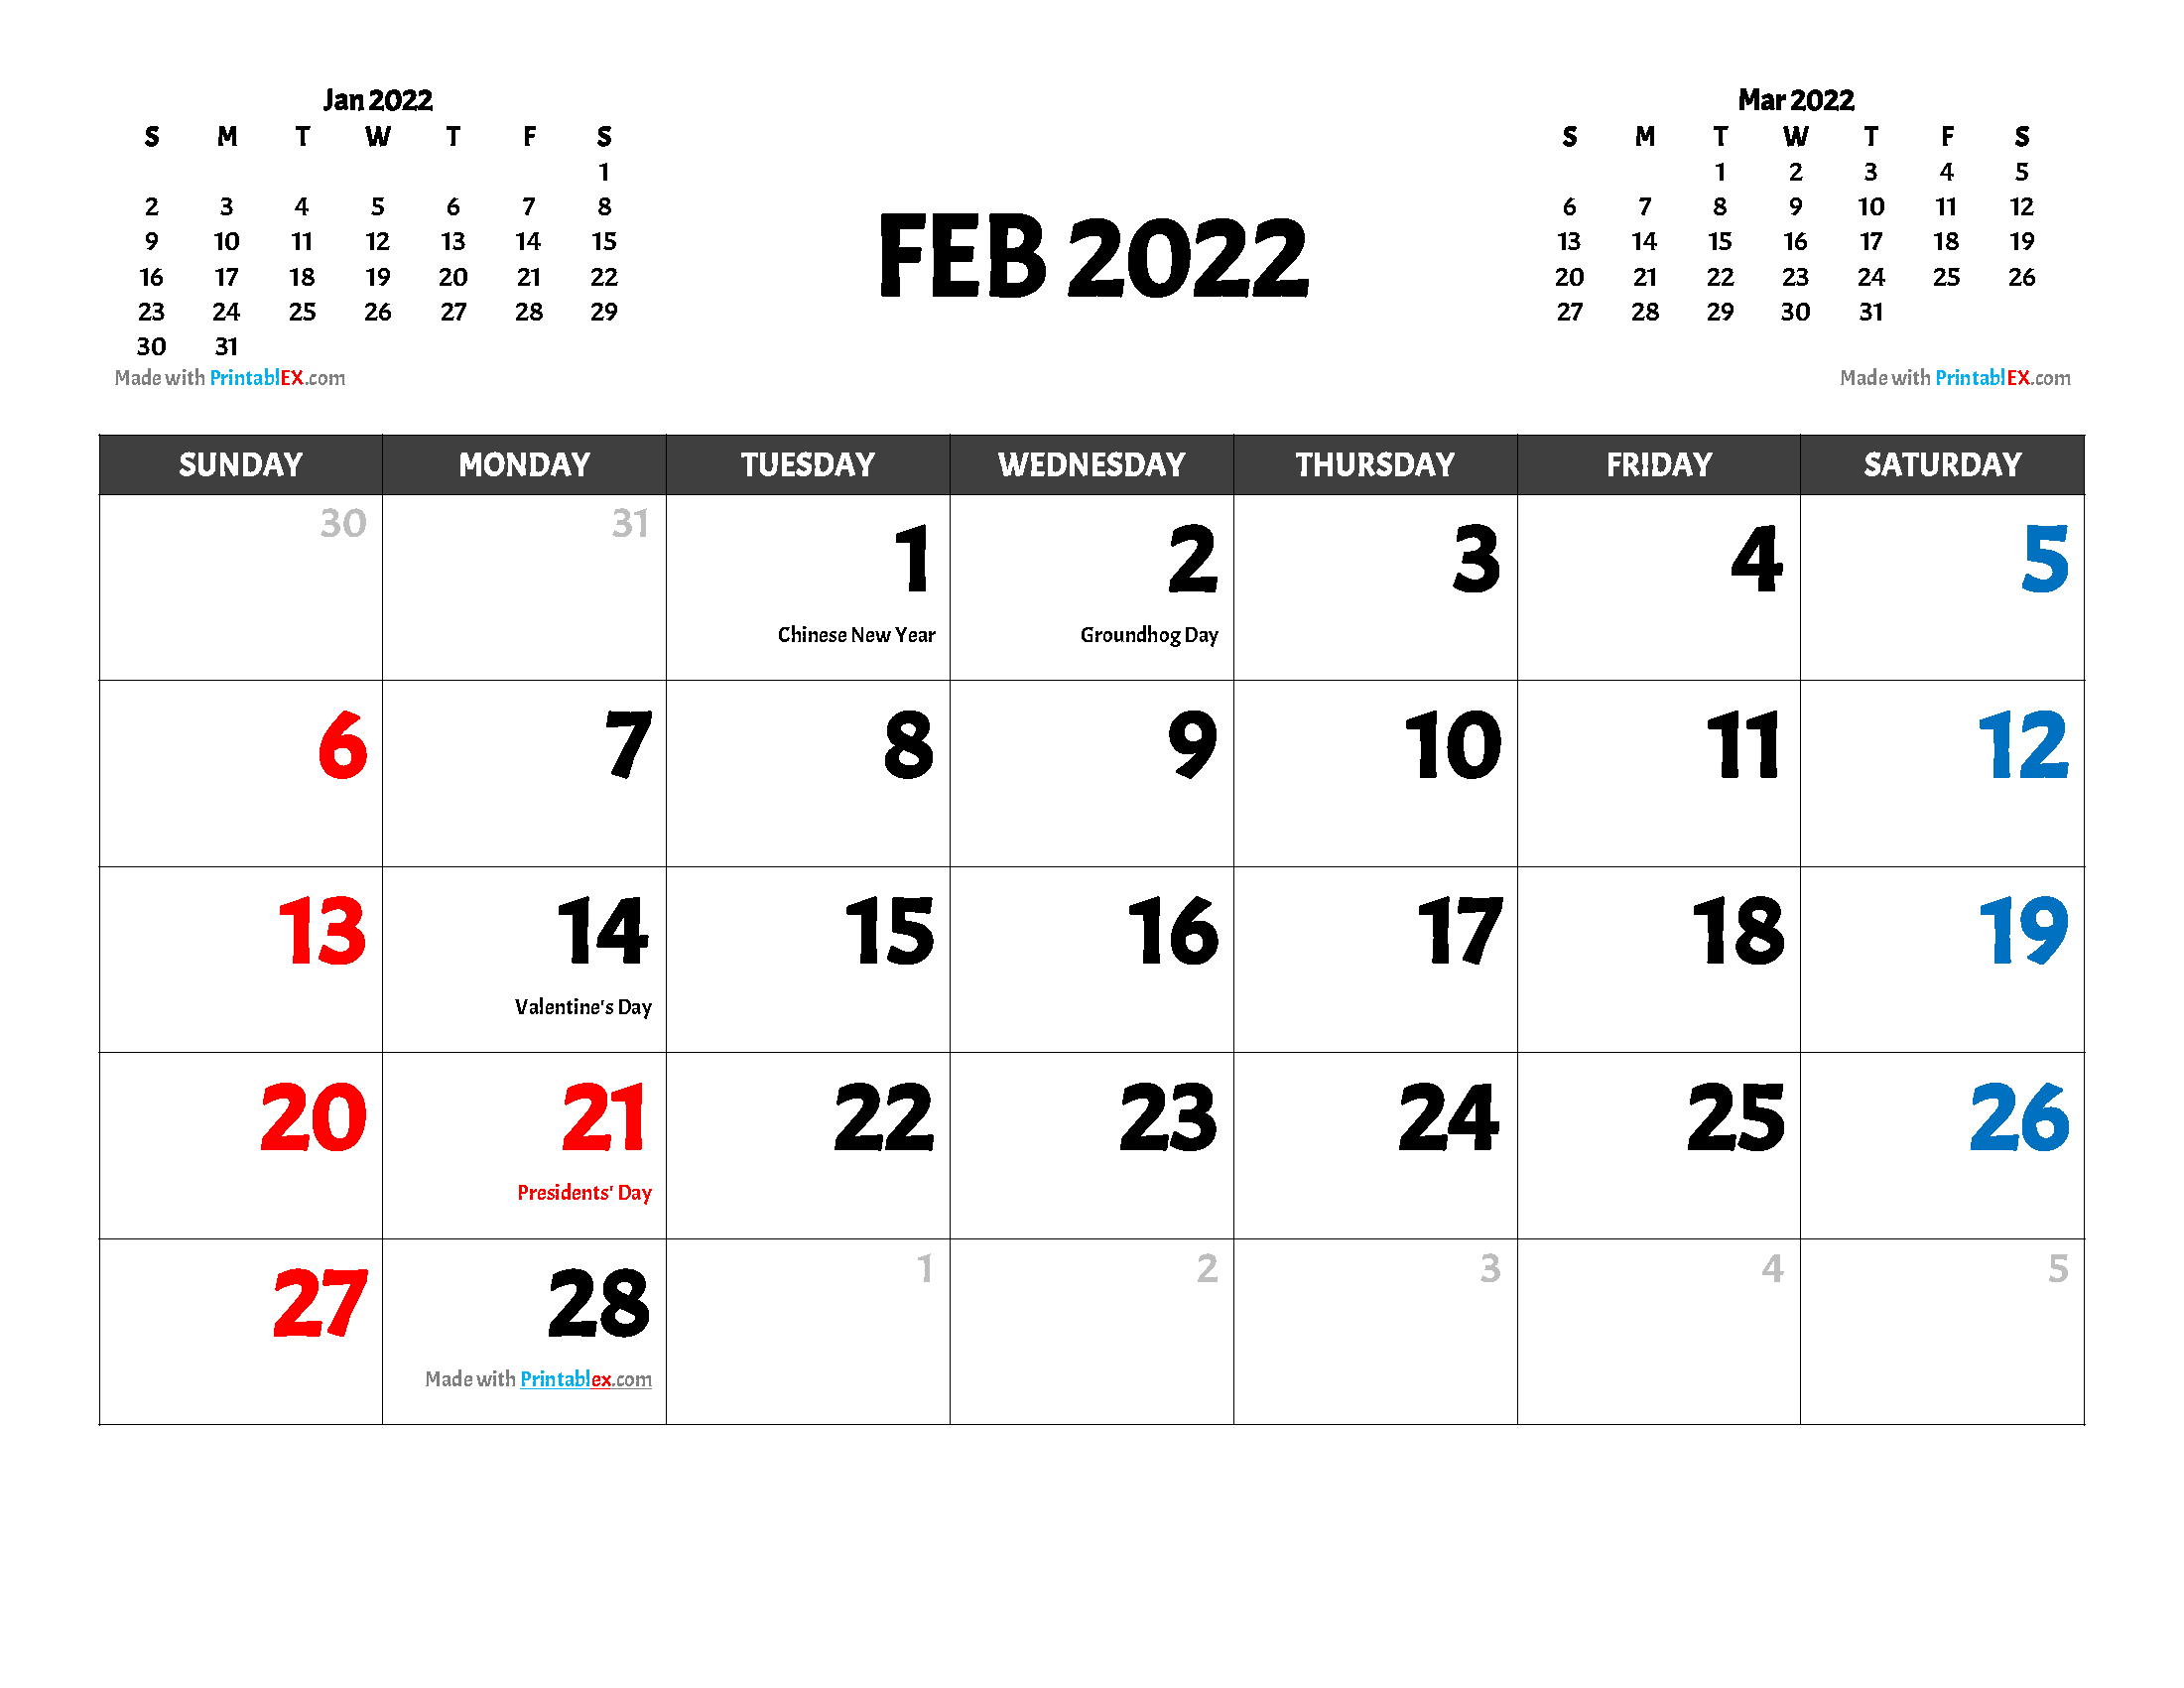 Free Printable February 2022 Calendar with holidays and observances in United States